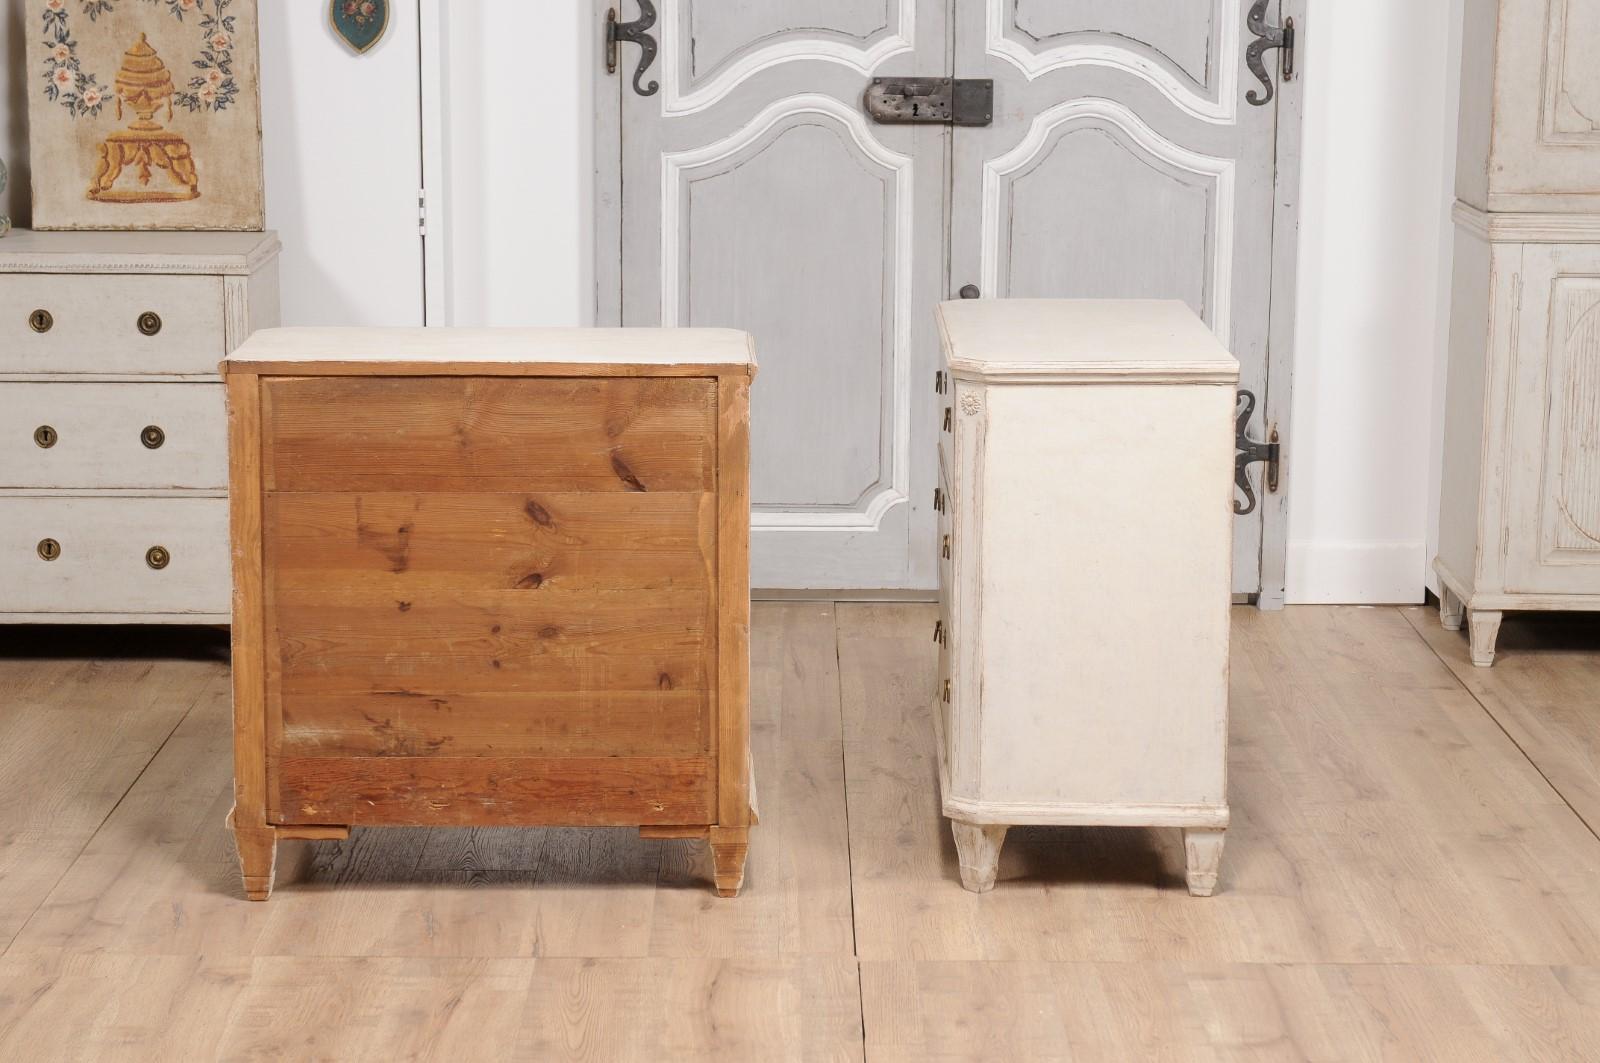 19th Century Swedish Gustavian Style Painted Three-Drawer Chests, a Pair For Sale 6